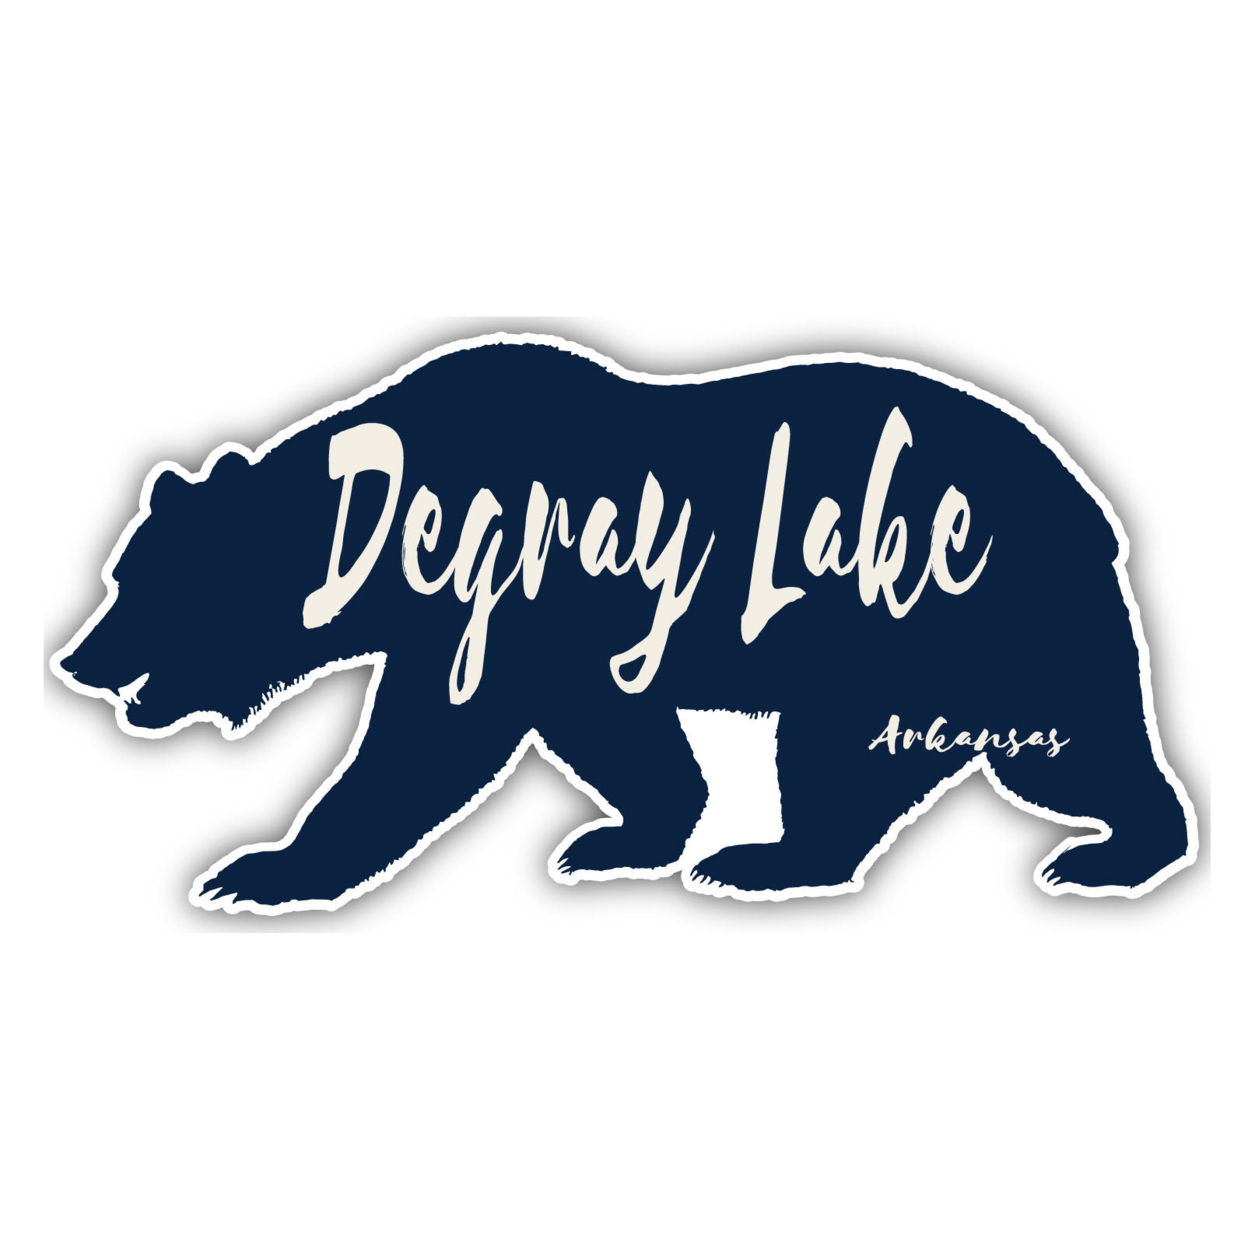 DeGray Lake Arkansas Souvenir Decorative Stickers (Choose Theme And Size) - 4-Pack, 2-Inch, Tent